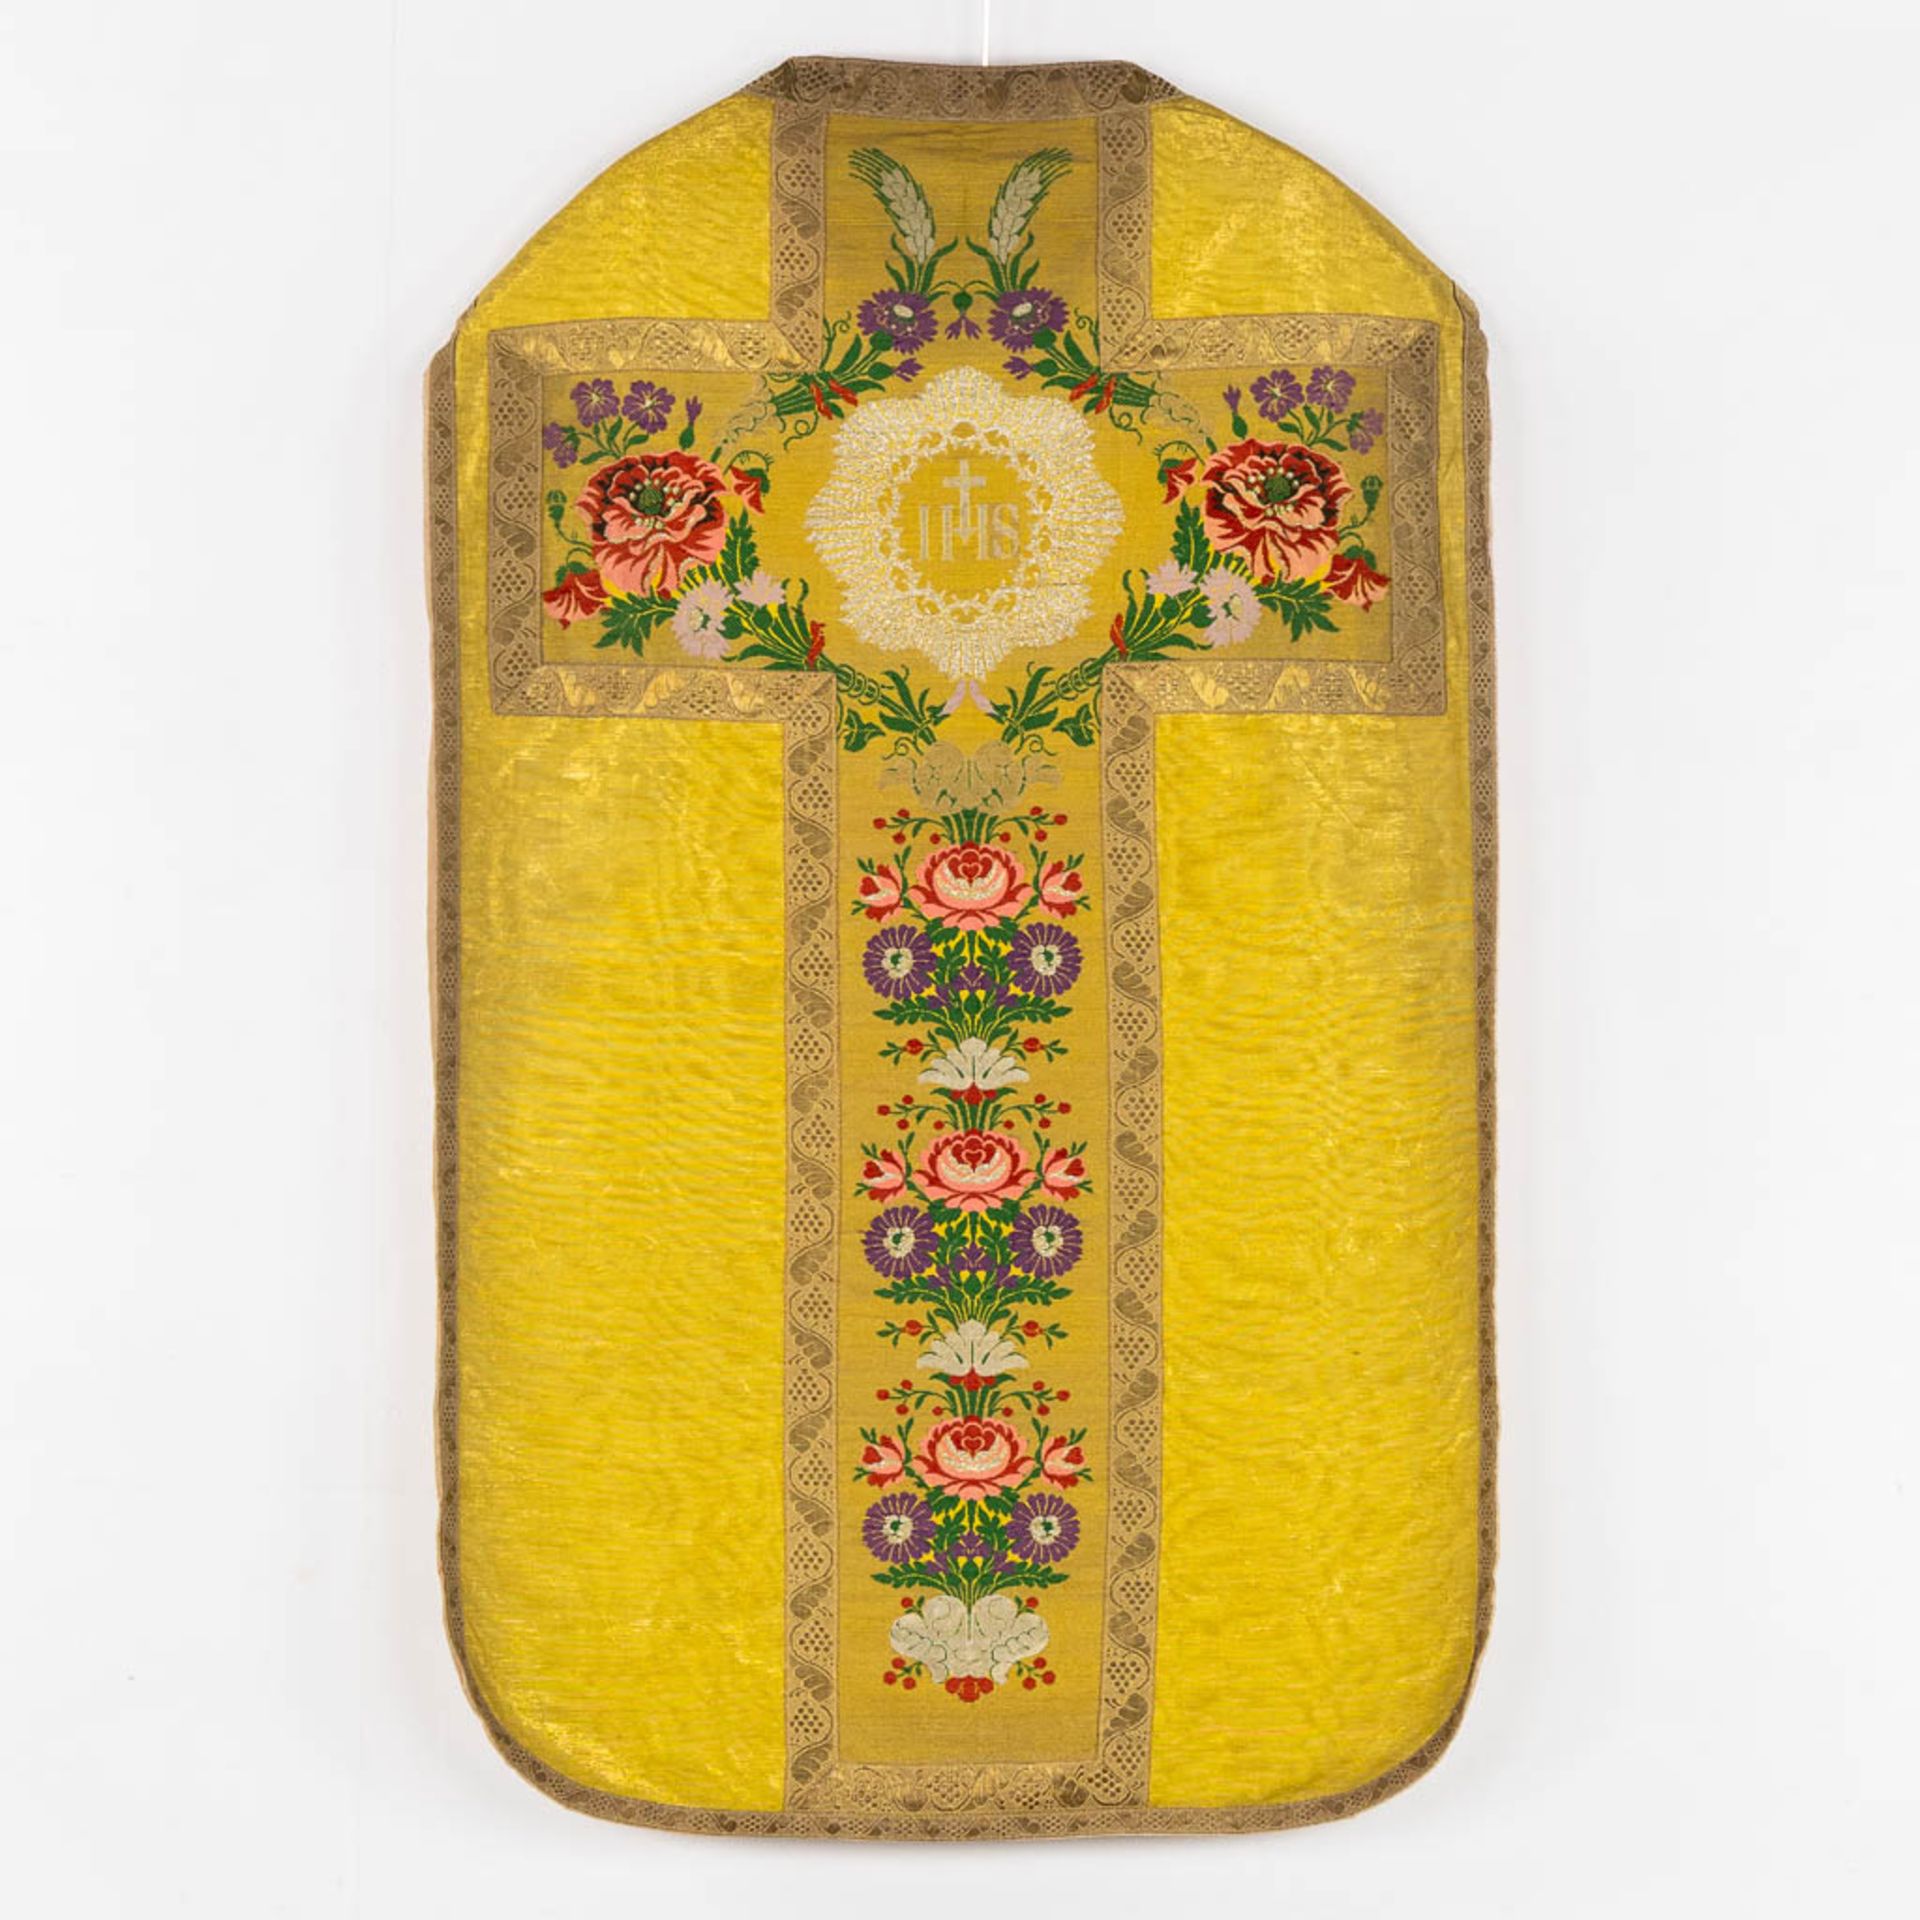 A Humeral Veil and Four Roman Chasubles, embroideries with an IHS and floral decor. - Image 8 of 29